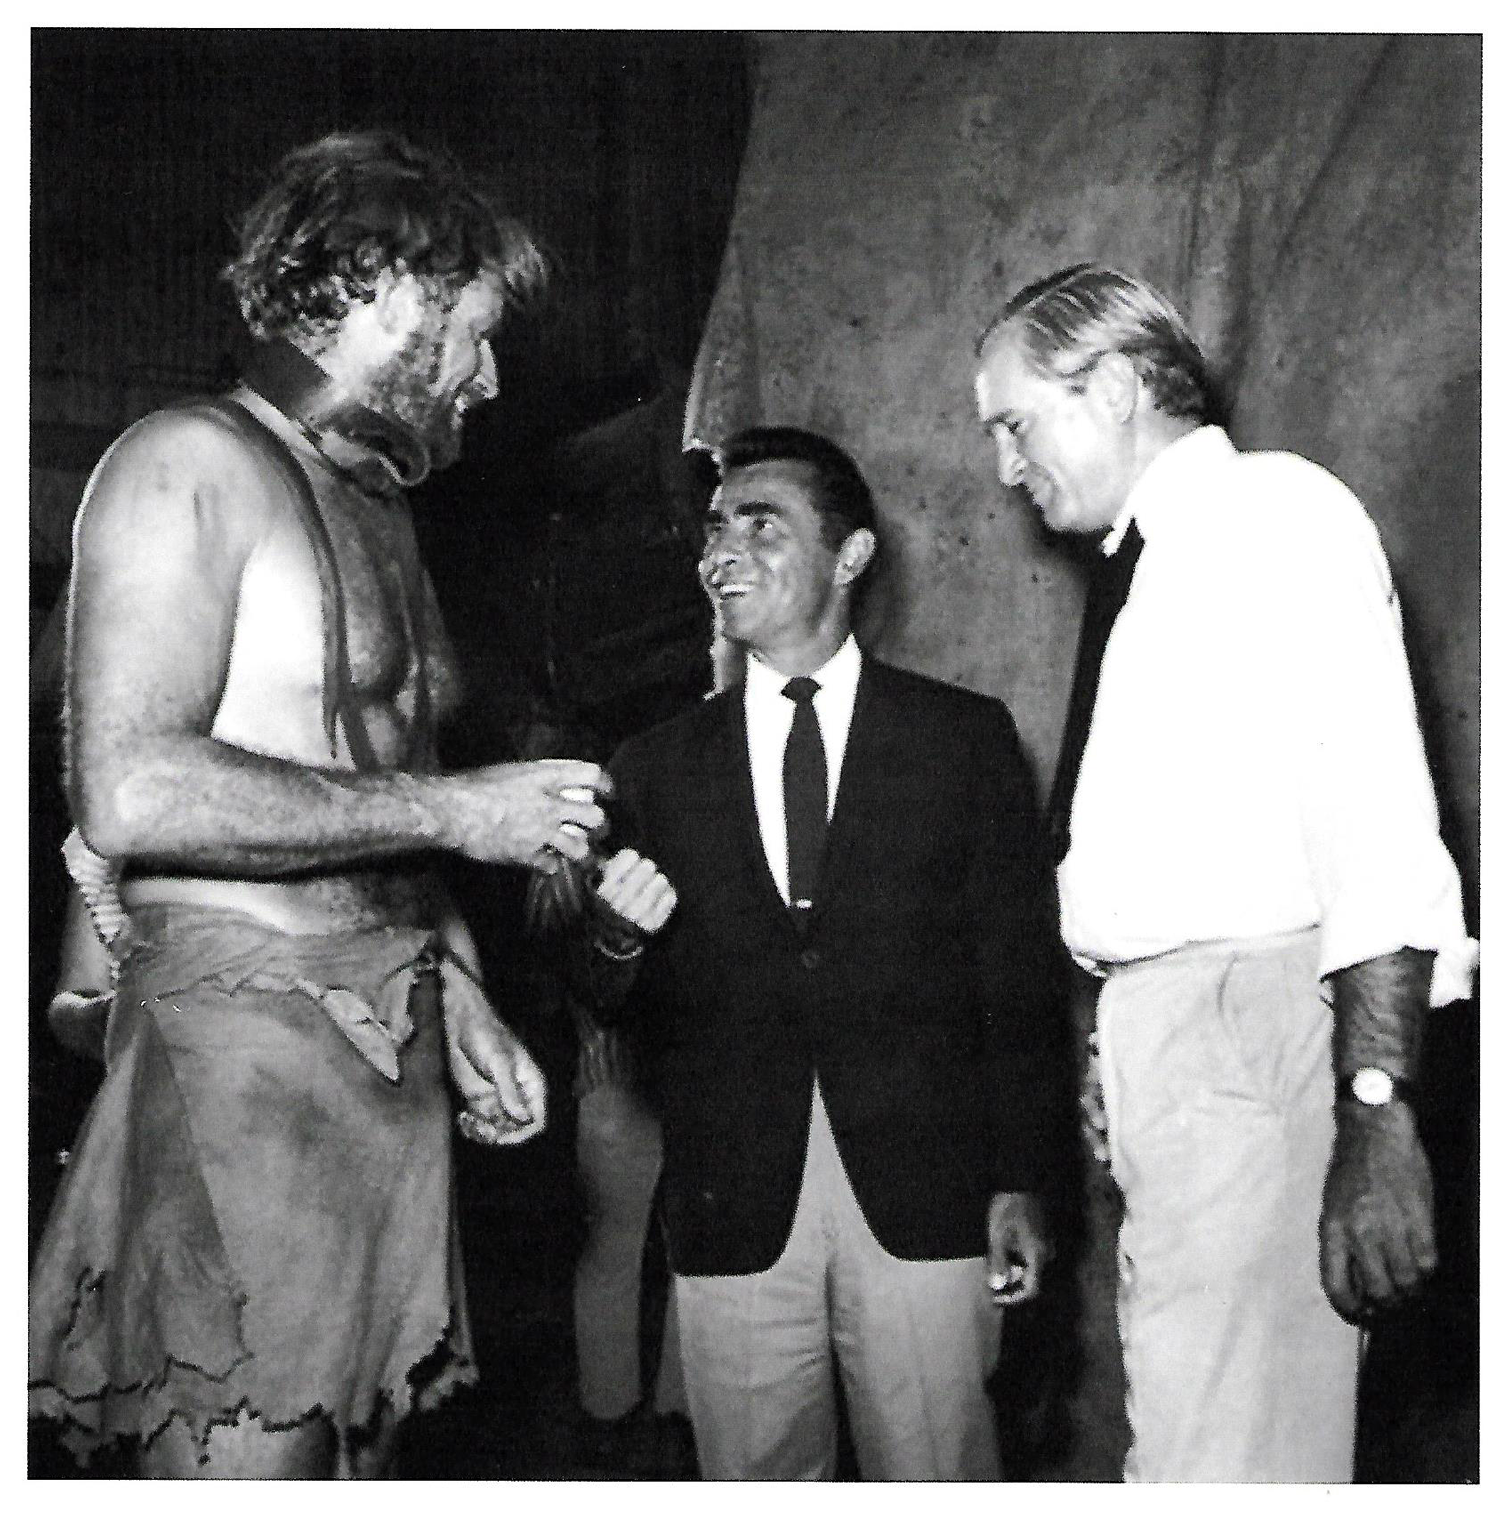  Rod Serling chats with Charlton Heston (as the astronaut George Taylor) on the set of  Planet of the Apes . 